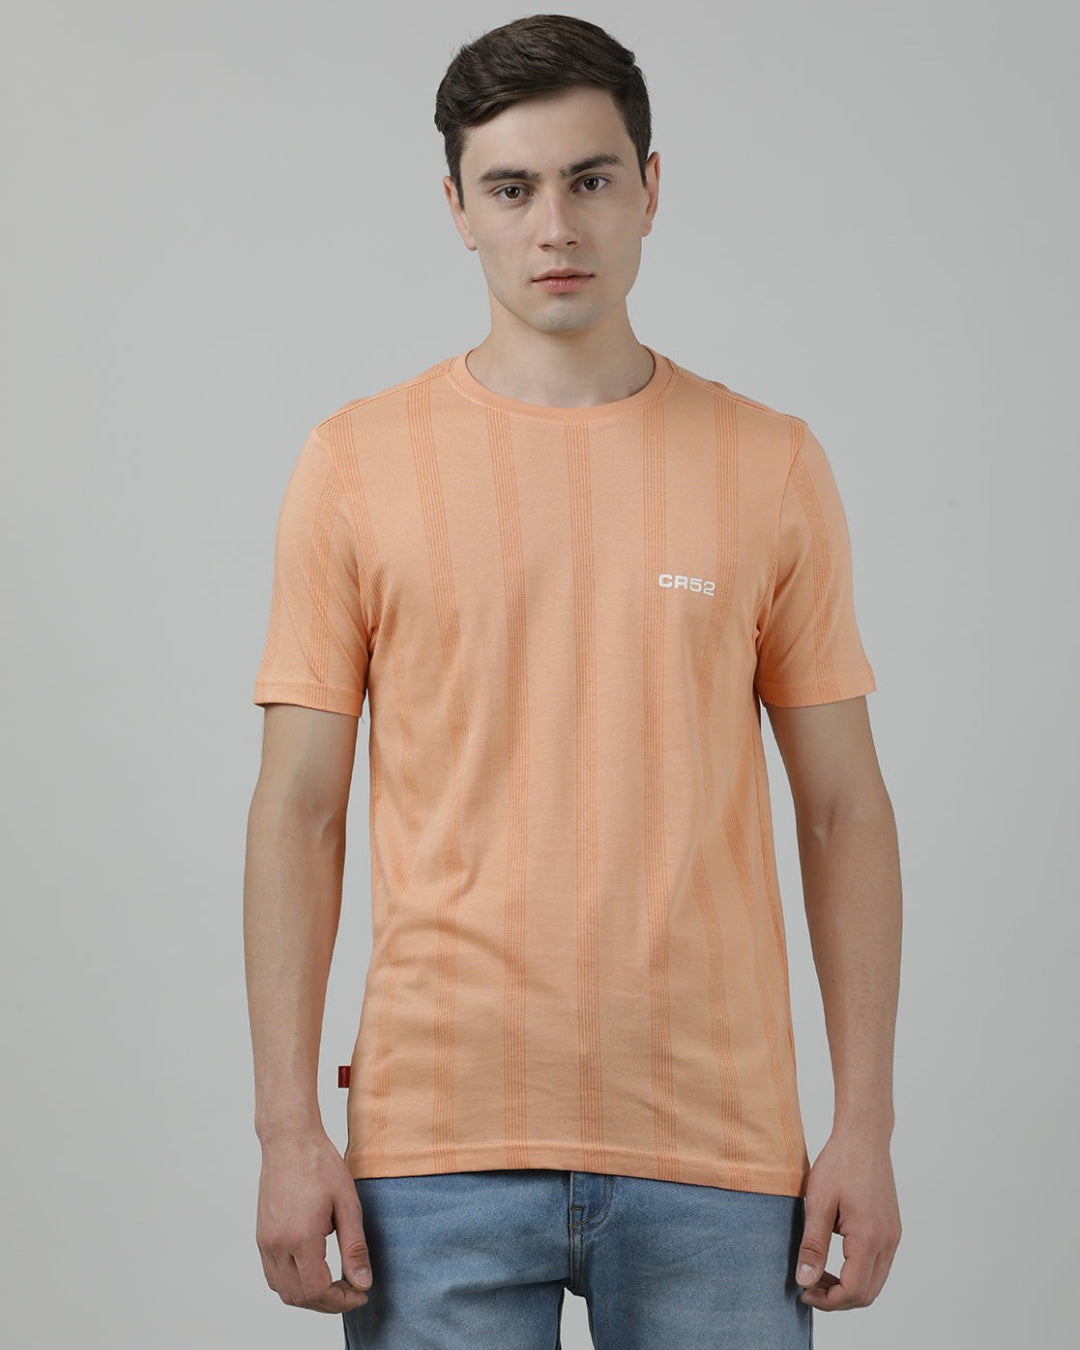 Casual Crew Neck Coral Printed T-Shirt Half Sleeve Slim Fit Jersey with Collar for Men